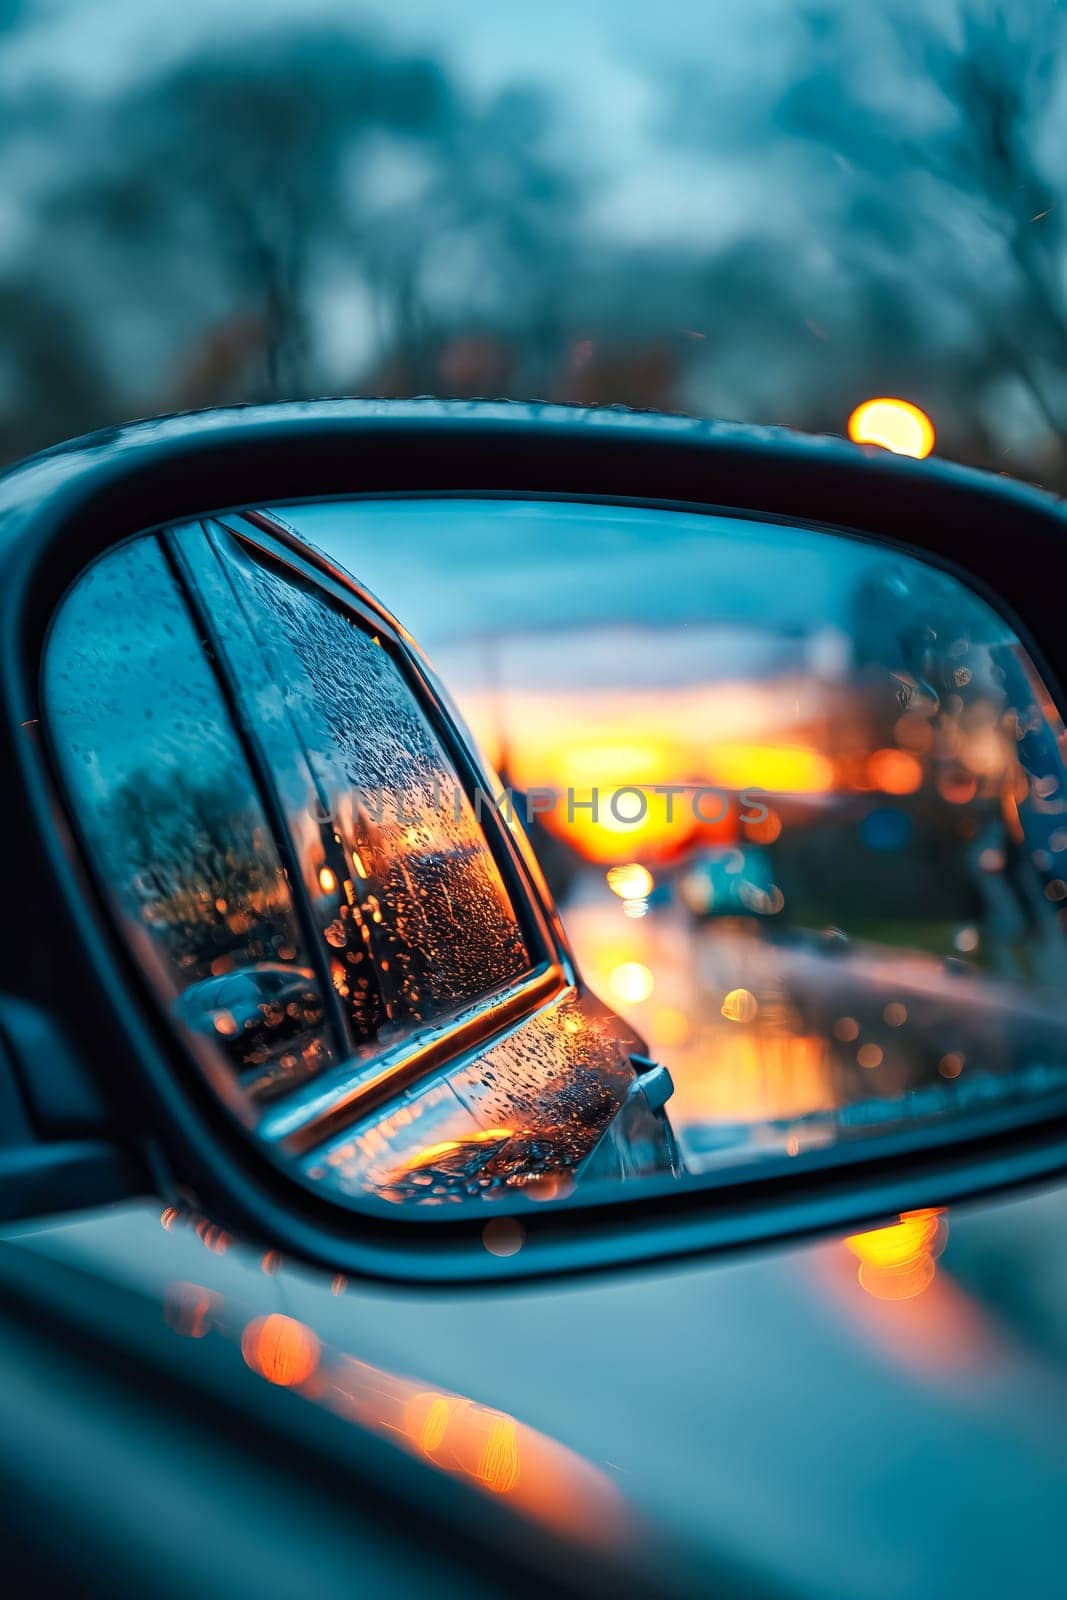 A car's rear view mirror is fogged up and the reflection of the car is blurry. The scene is set at dusk, with the sun setting in the background. Generative AI